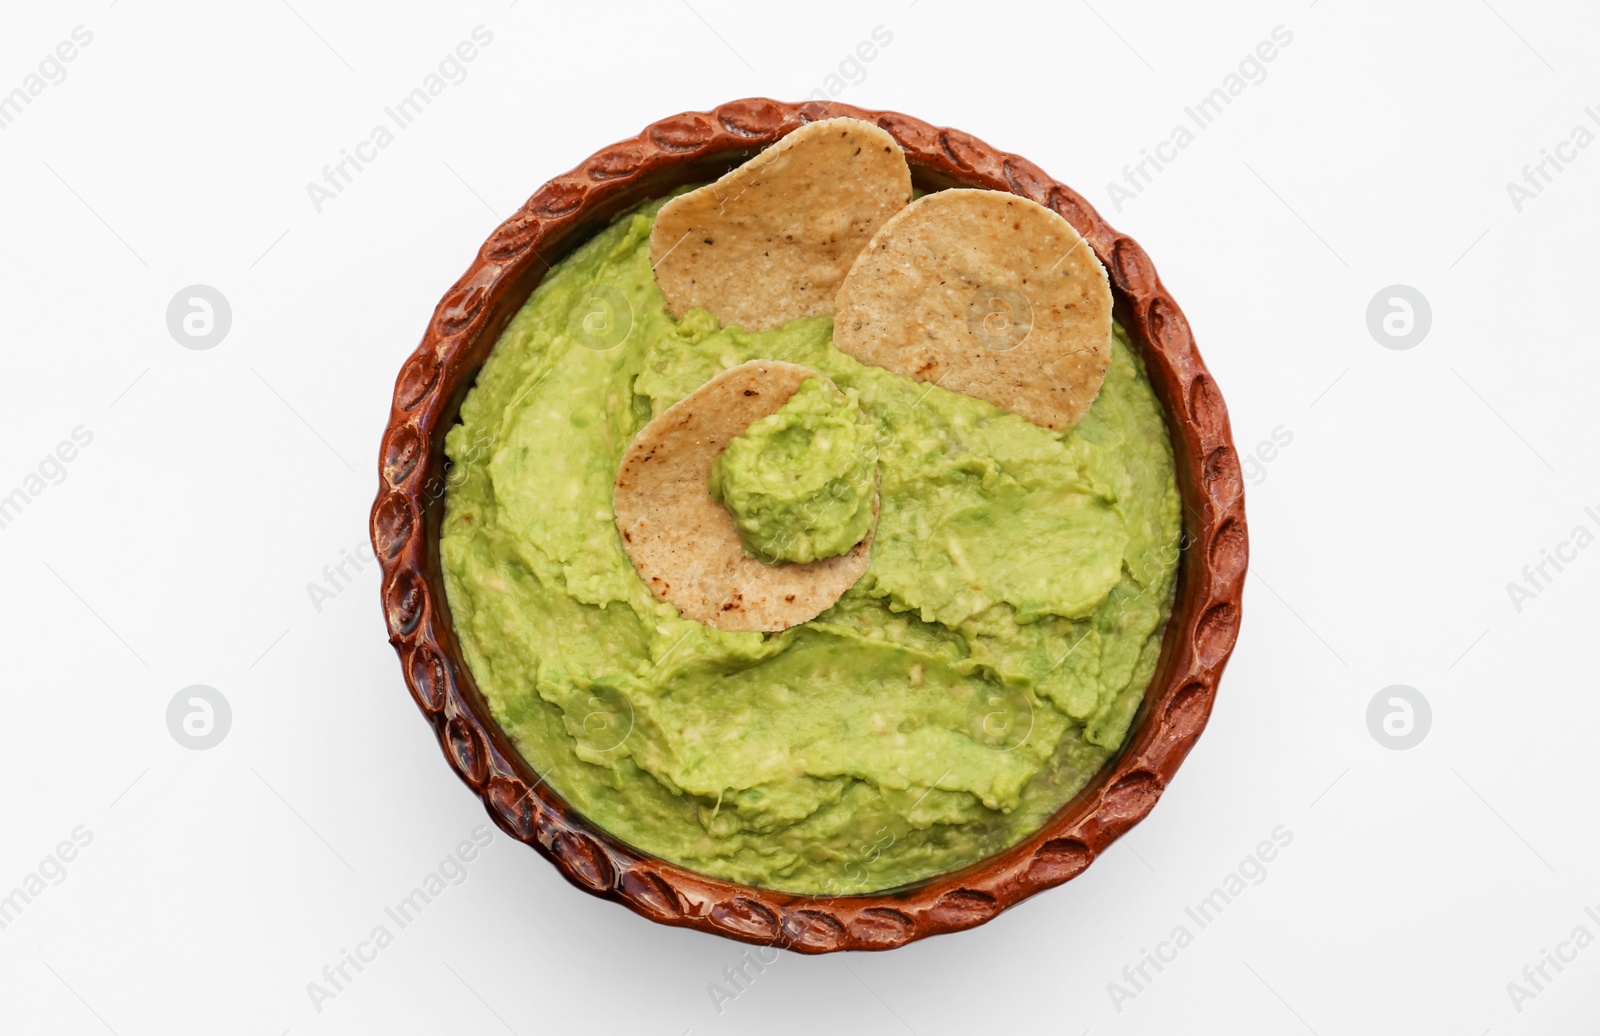 Photo of Delicious guacamole made of avocados with chips on white background, top view